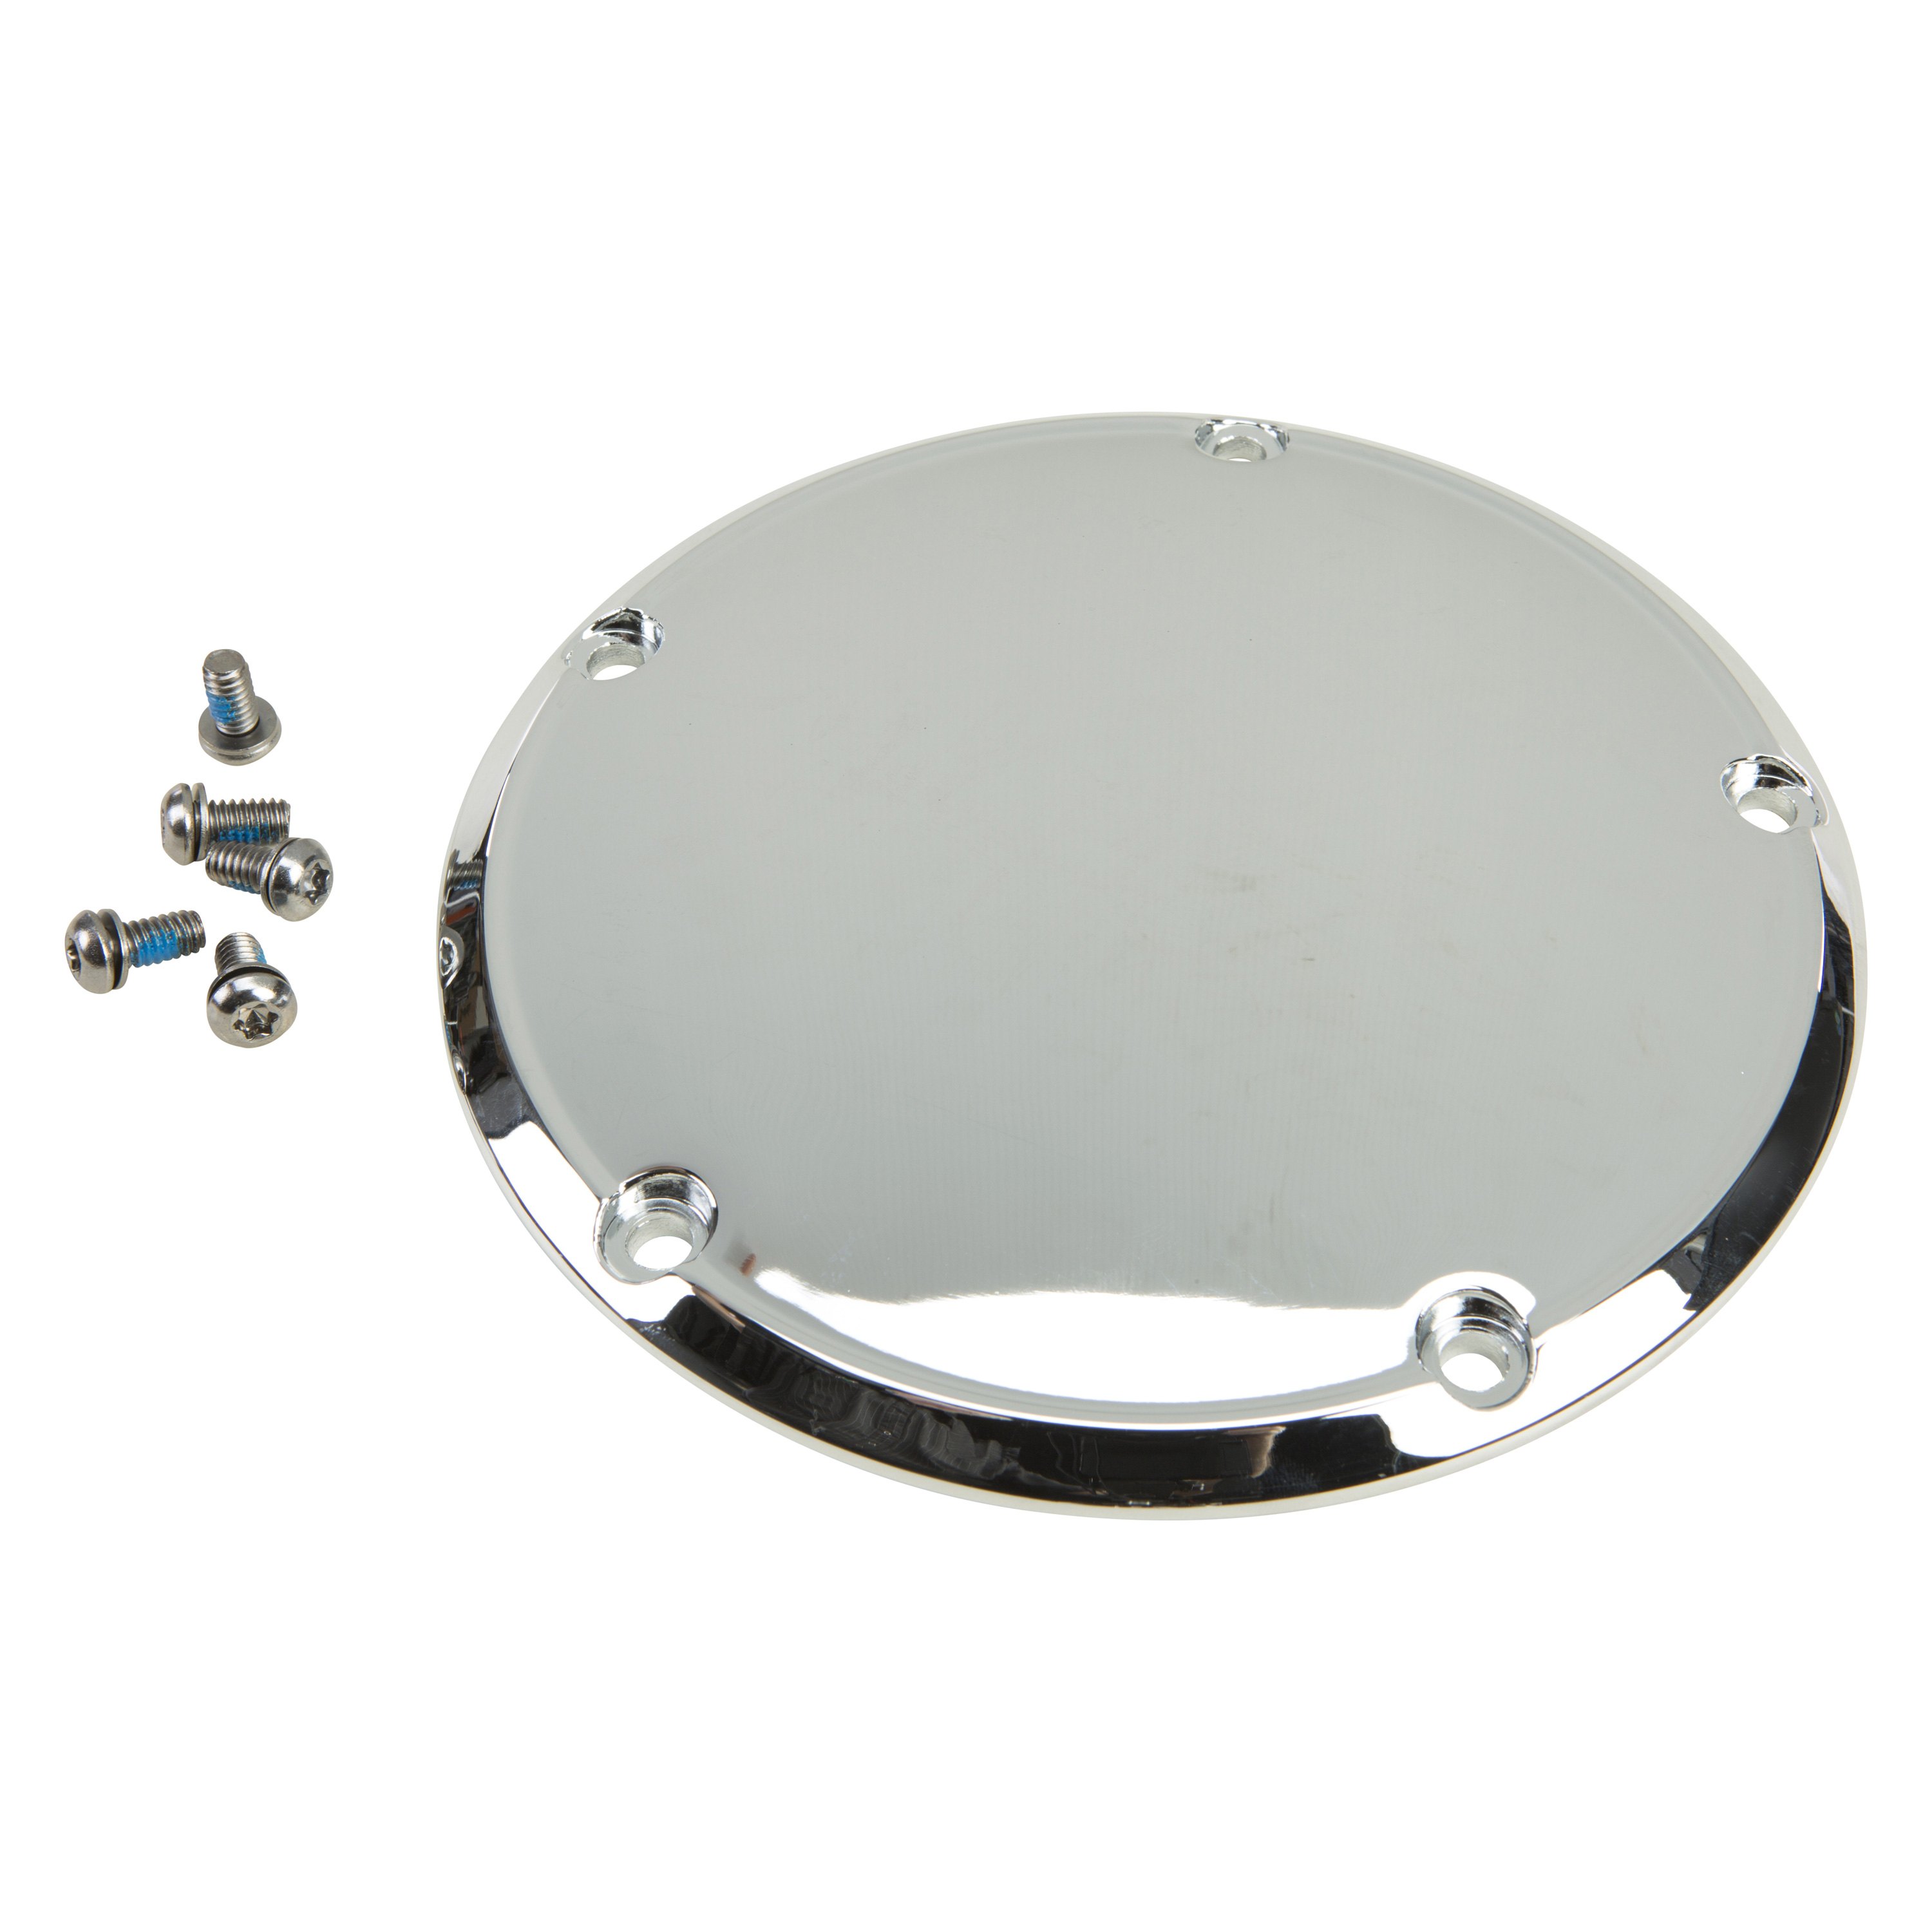 HARDDRIVE 3 HOLE DERBY COVER CHROME 30-573